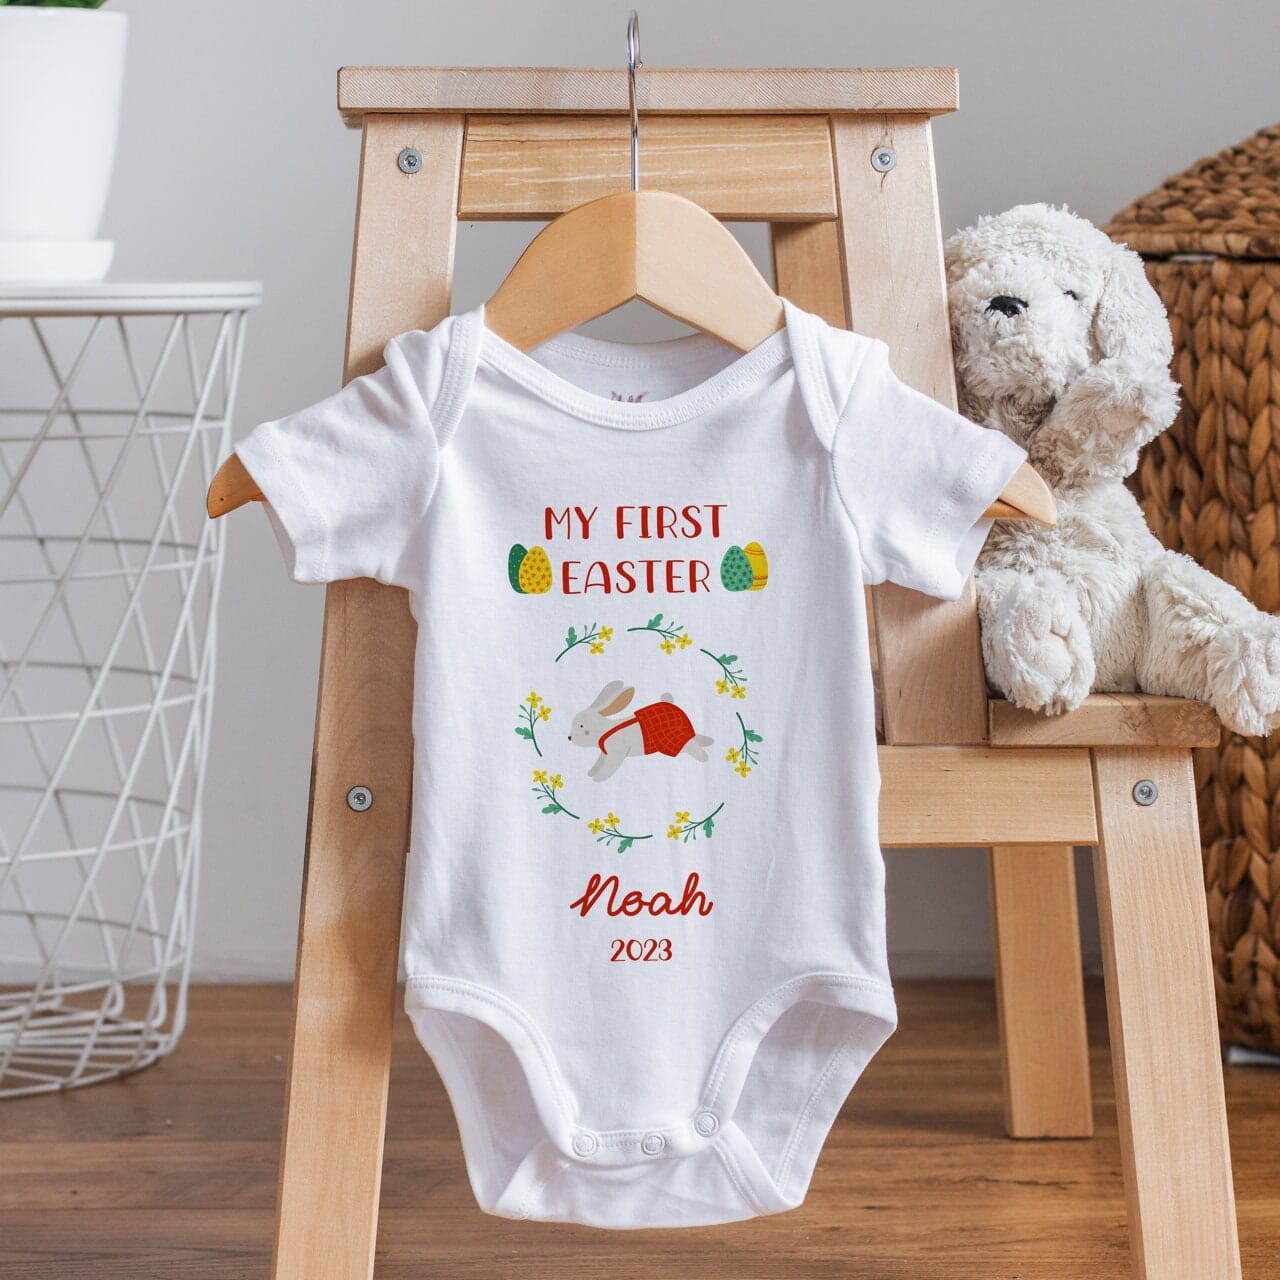 Personalised My first Easter bodysuit for boys or girls, Organic cotton, Baby Bunny Tshirt, Easter Gift